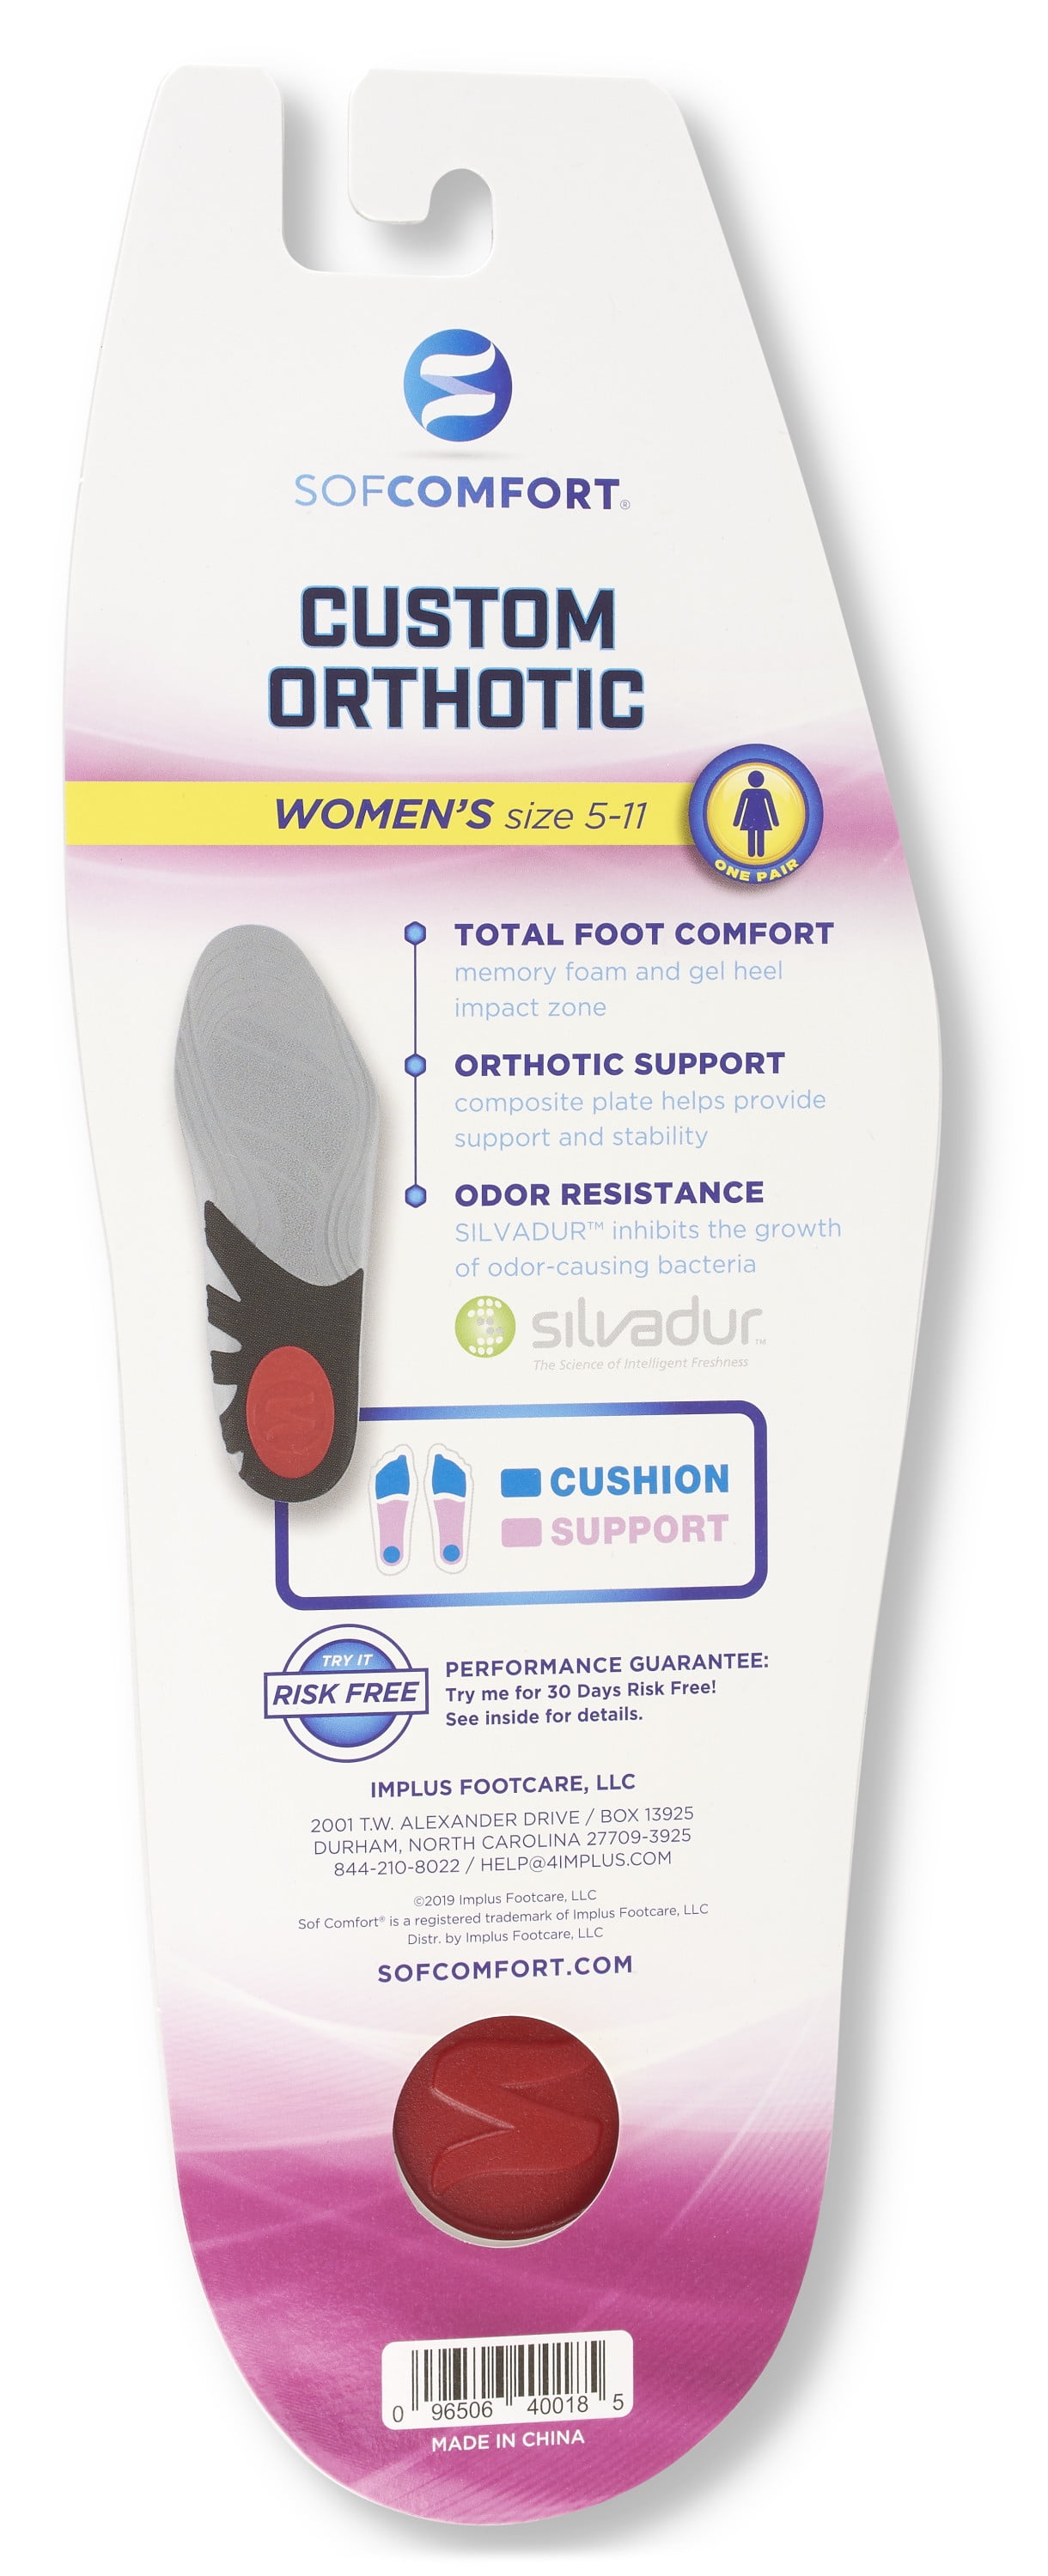 SOFCOMFORT Orthotic Insole One Size 